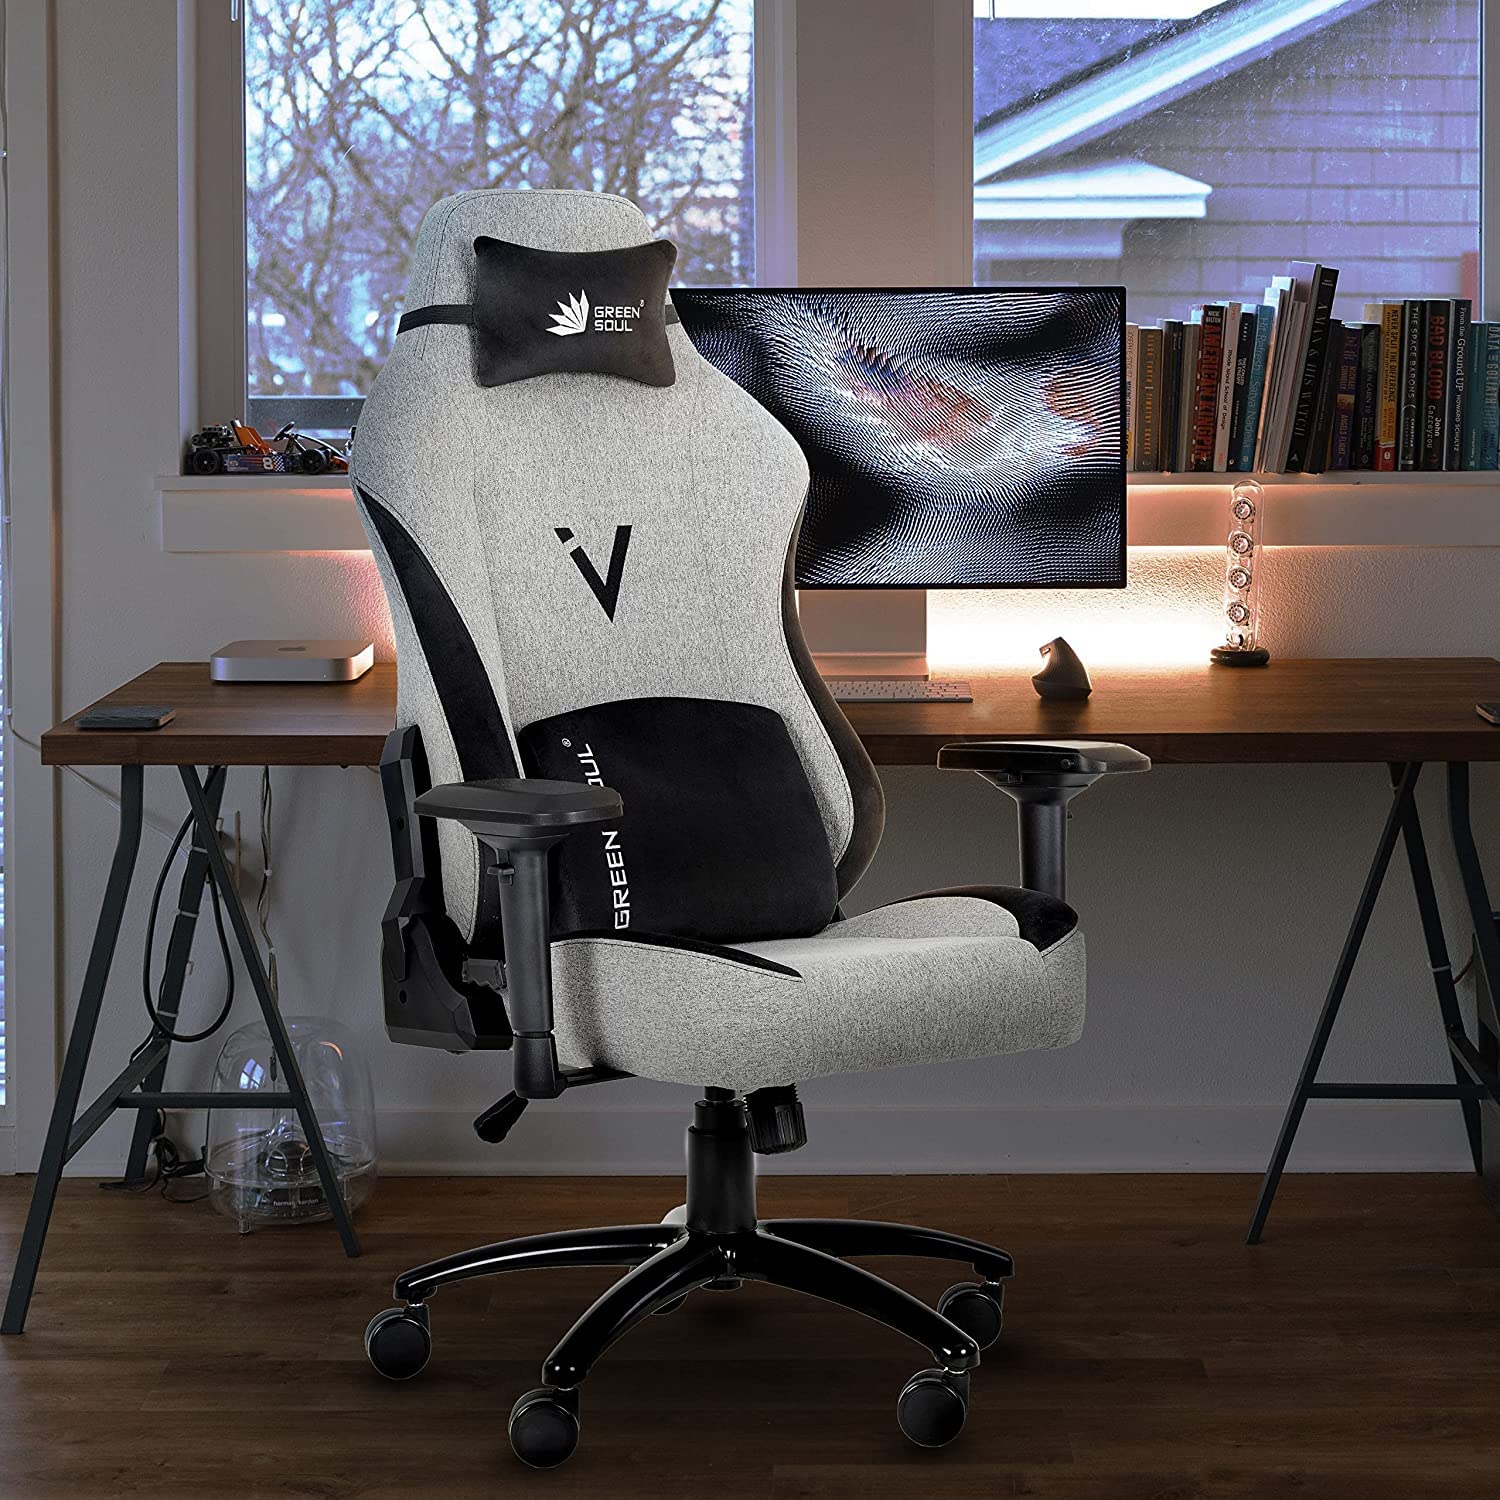 best gaming chairs in India